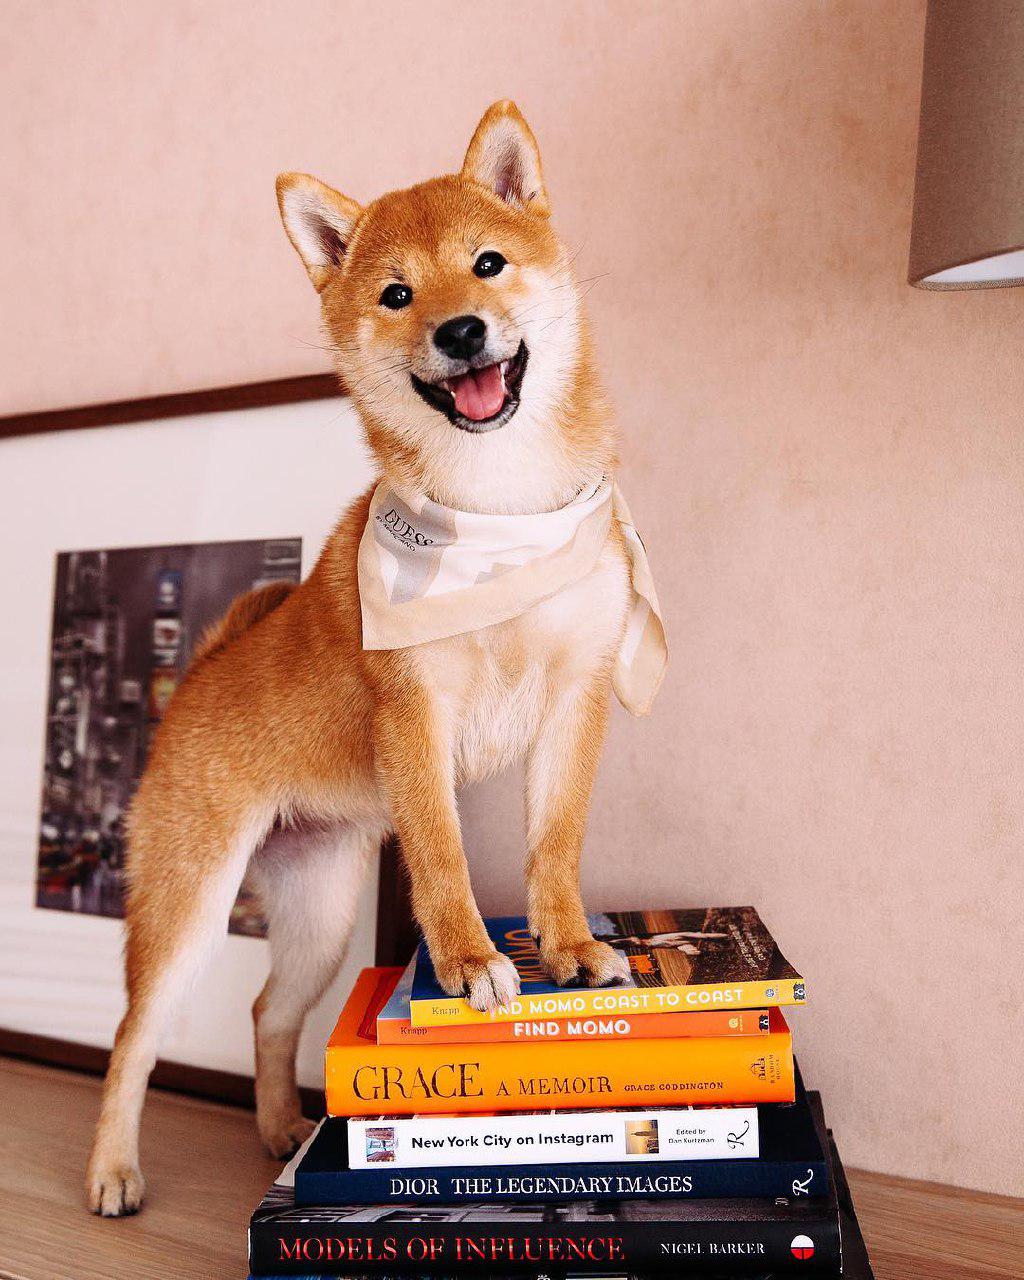 A Shiba Inu wearing a scarf while standing with its front legs on top of the pile of books